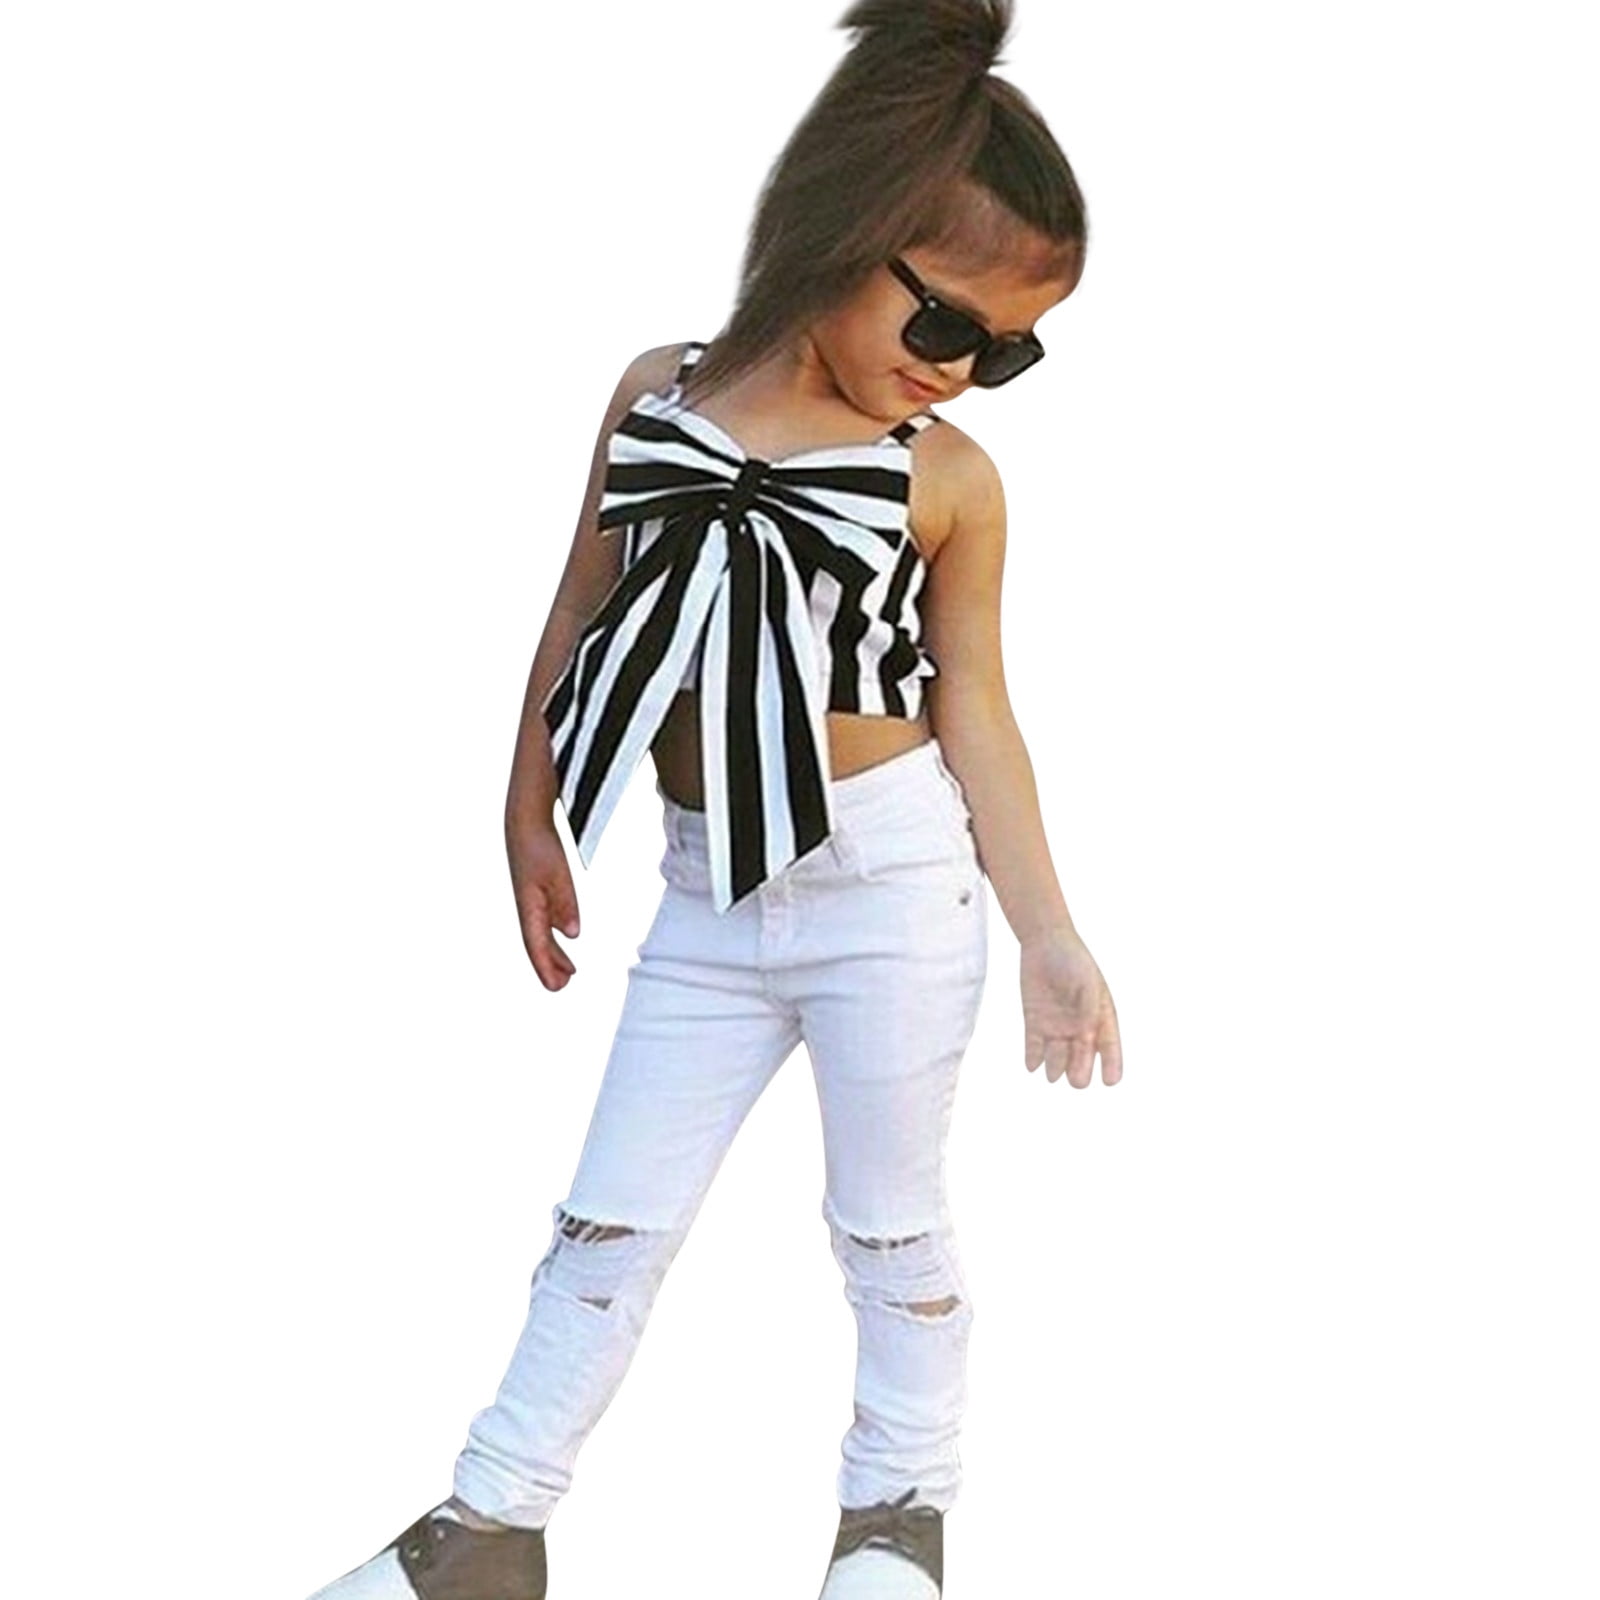 Cute Baby Girls Outfits Tops+Ripped Legging Trousers 2pcs Outfits Clothes  Set 